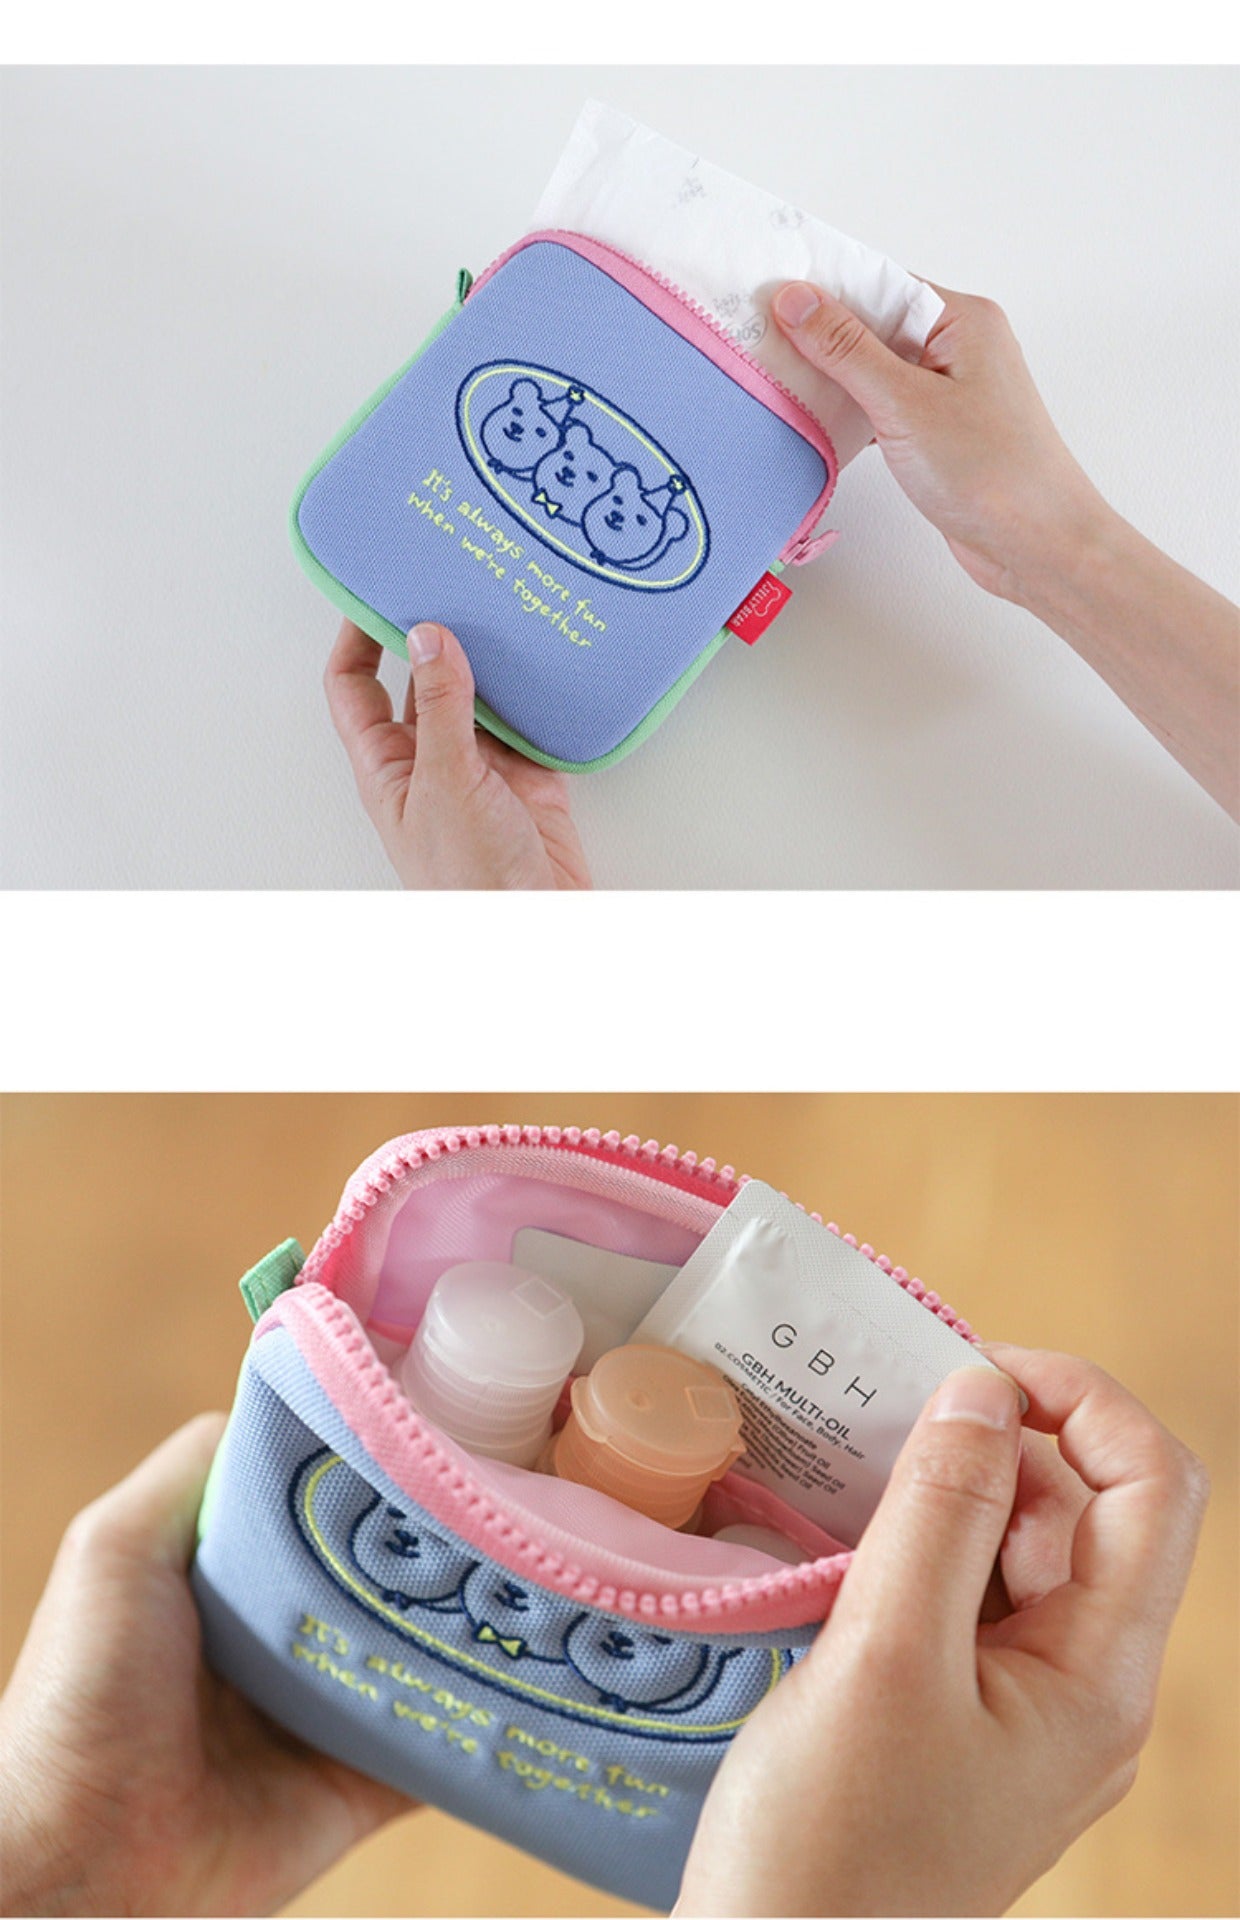 Dailylike KR - Together, Young & Free! Embroidered Cosmetic Storage Bag